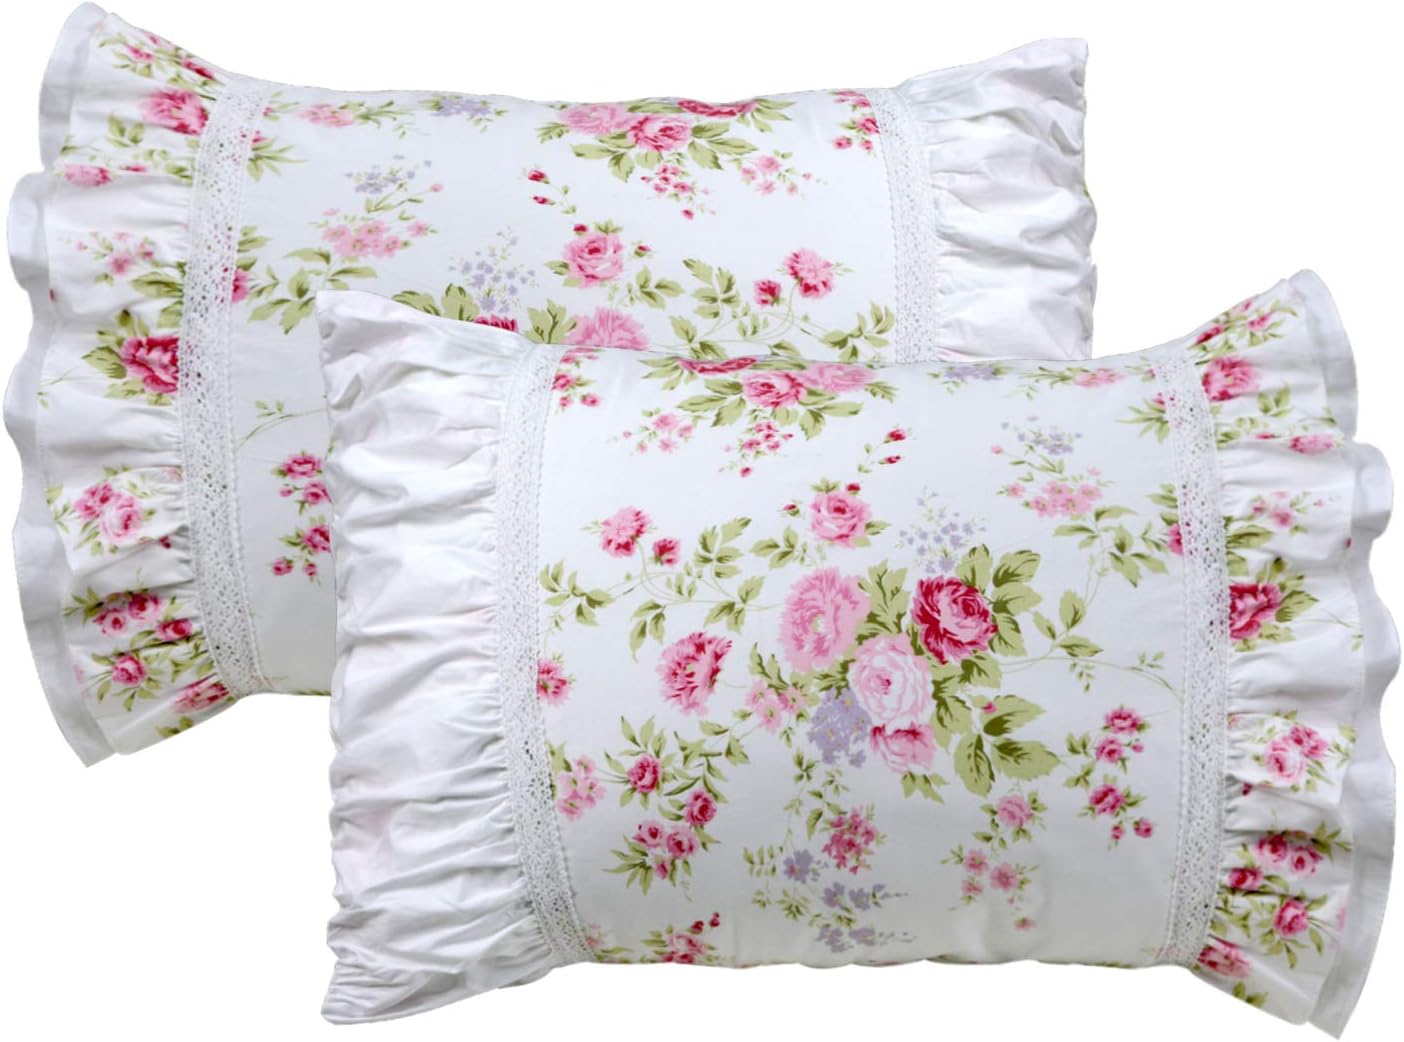 FADFAY Shabby Pink Rose Floral Print Pillowcases Elegant Country Style Vintage Lace Ruffles Bedding Pillow Covers Standared Size 19 x 29